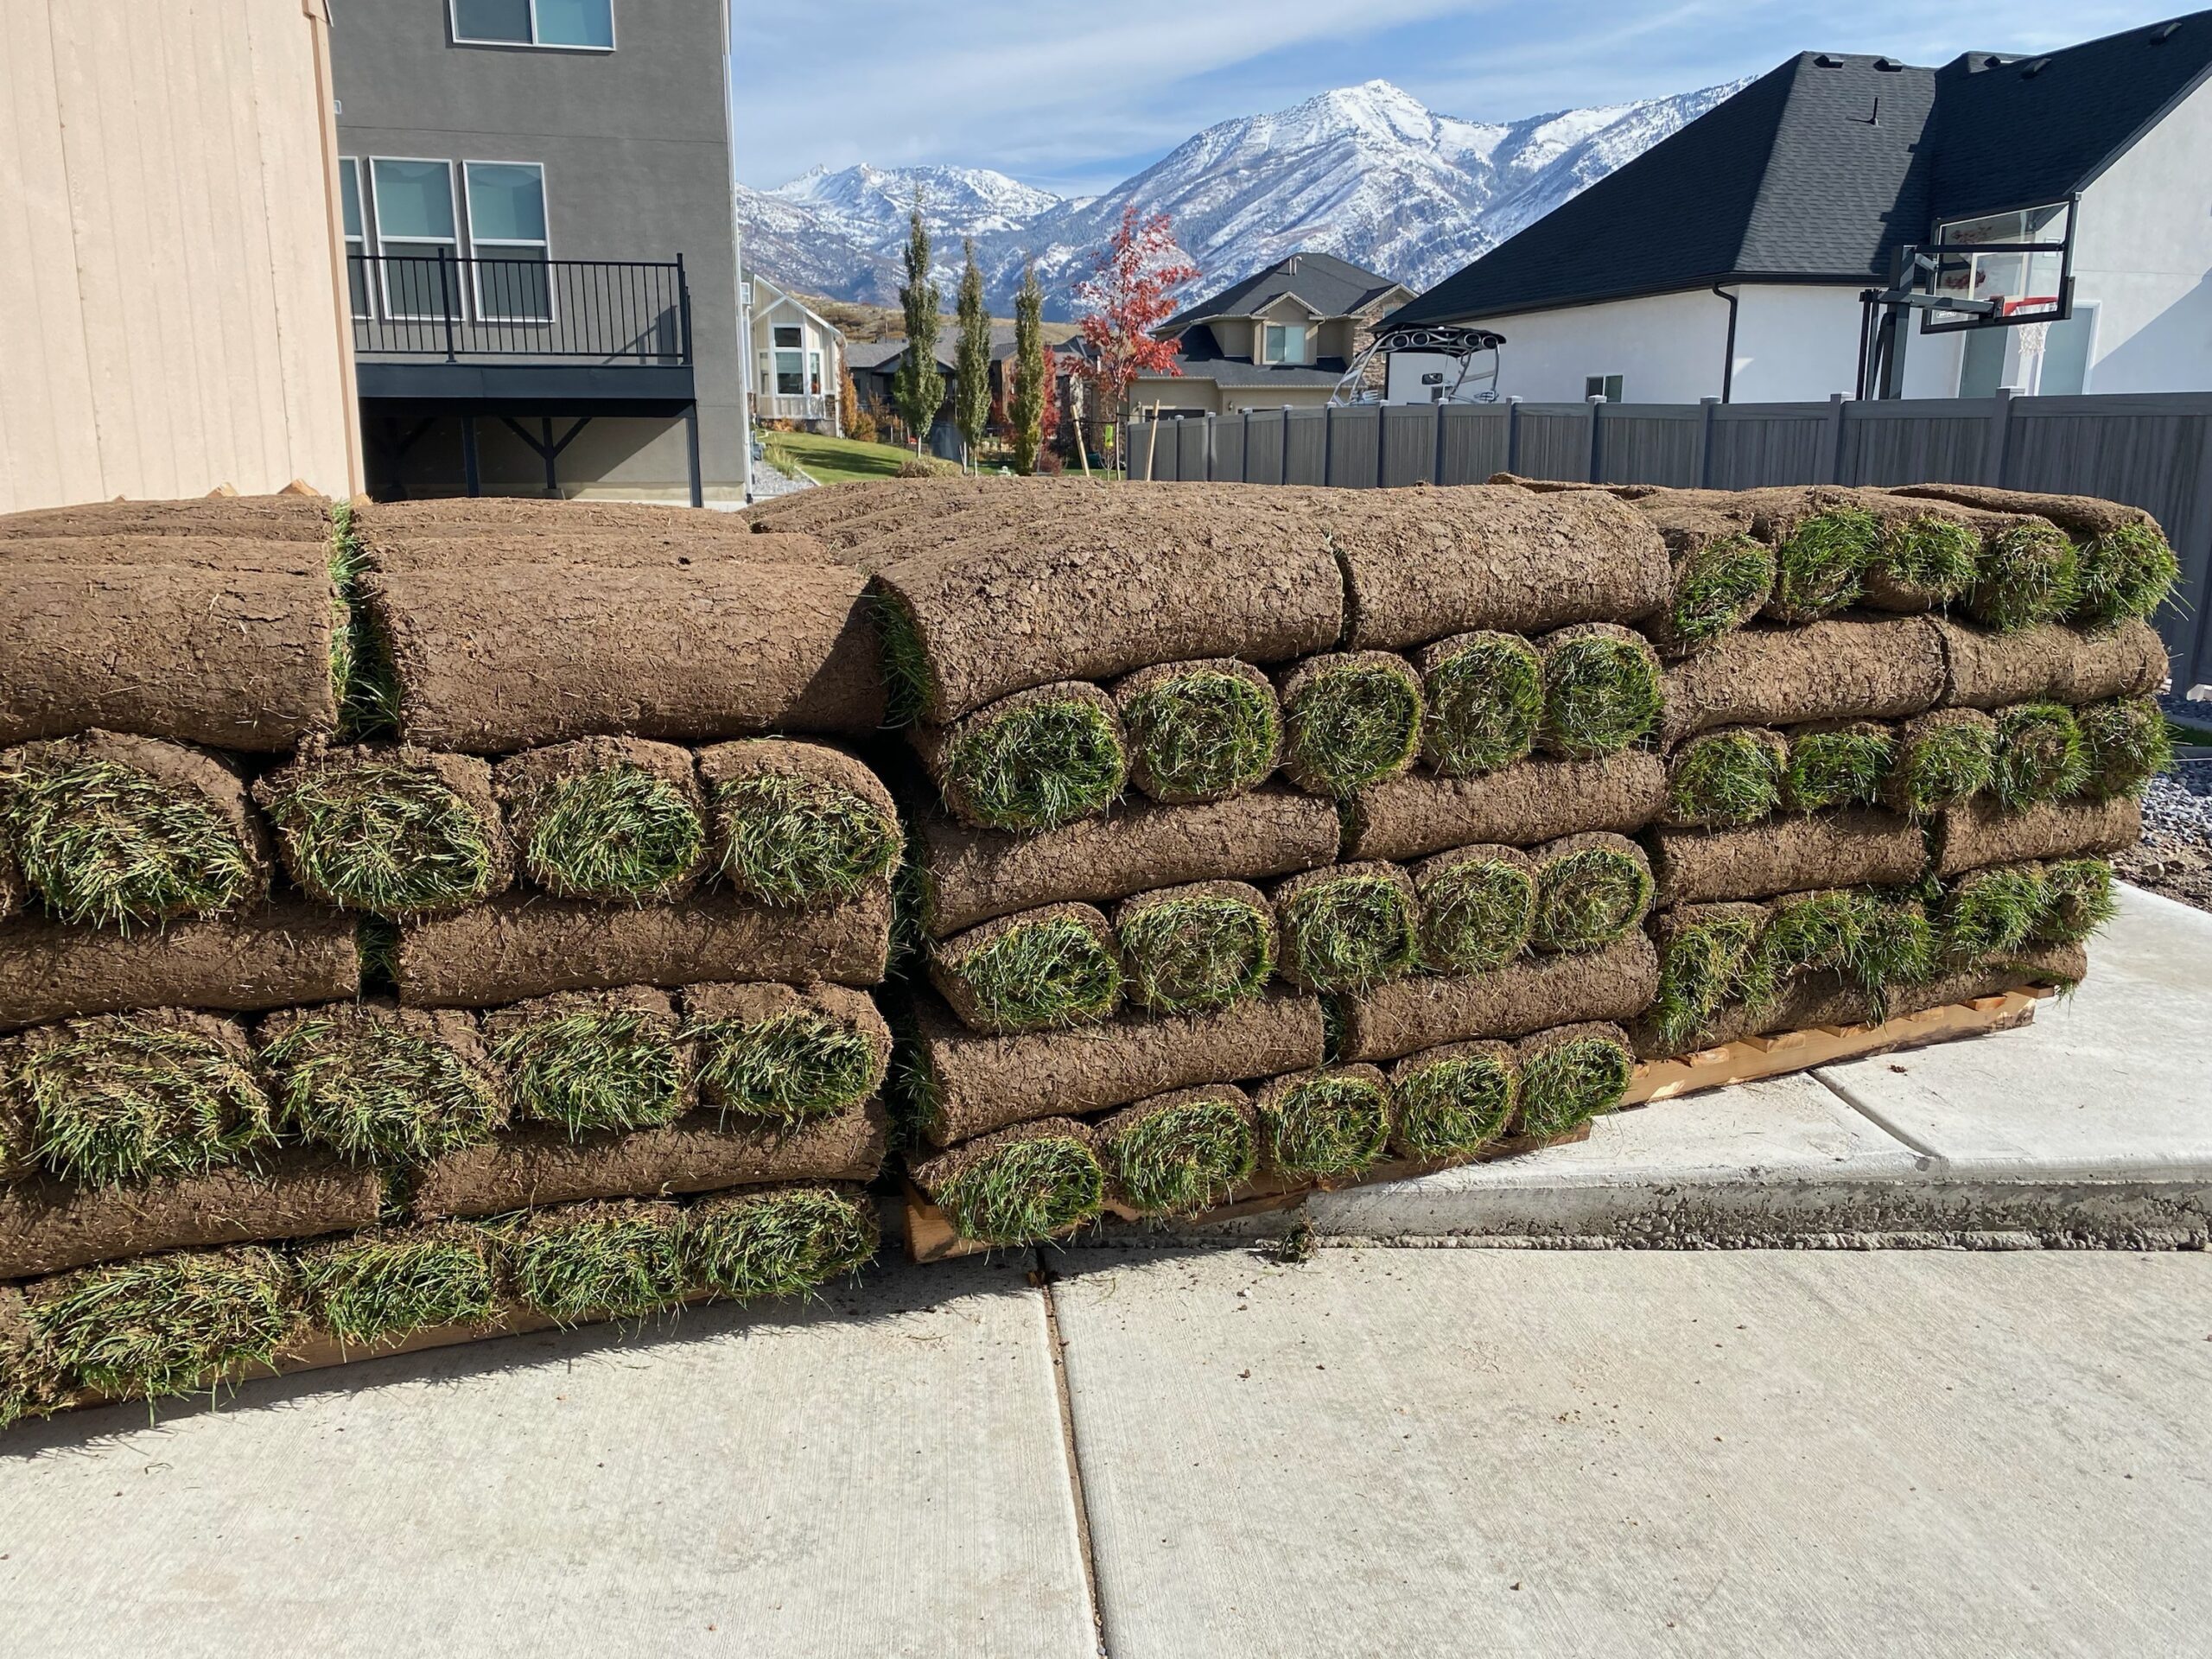 Sod Delivery